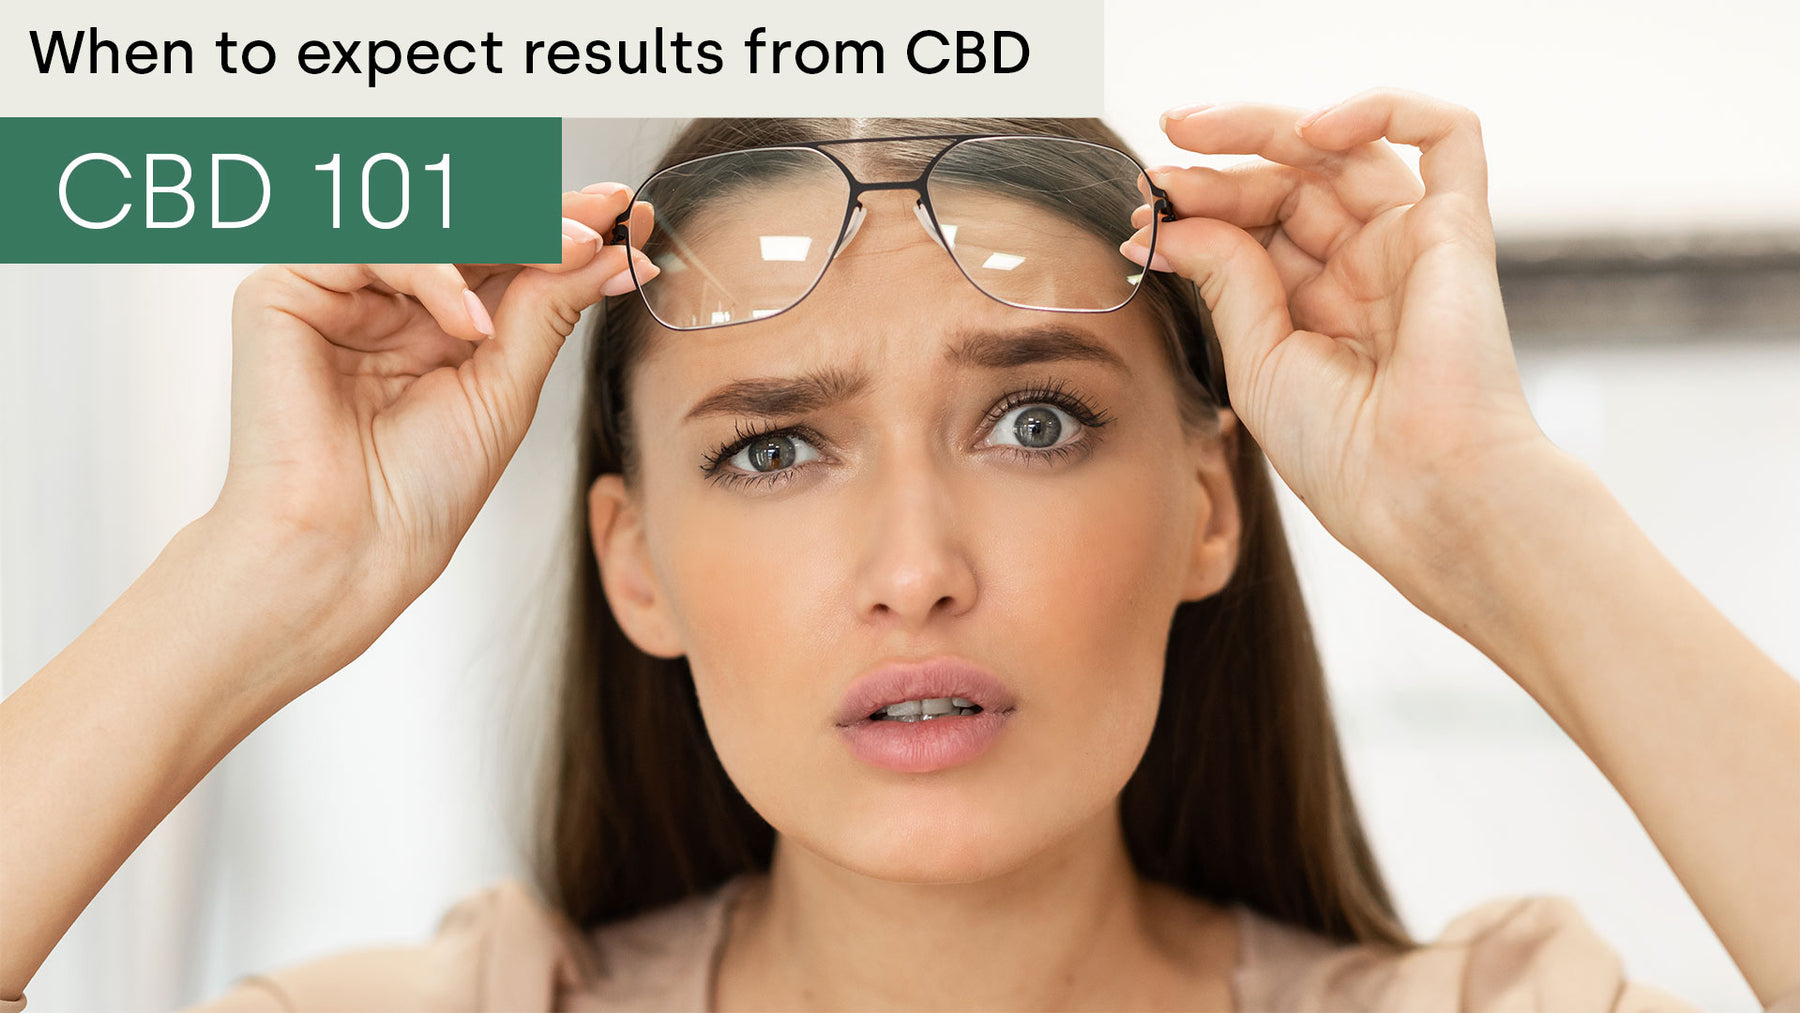 When To Expect Results From CBD